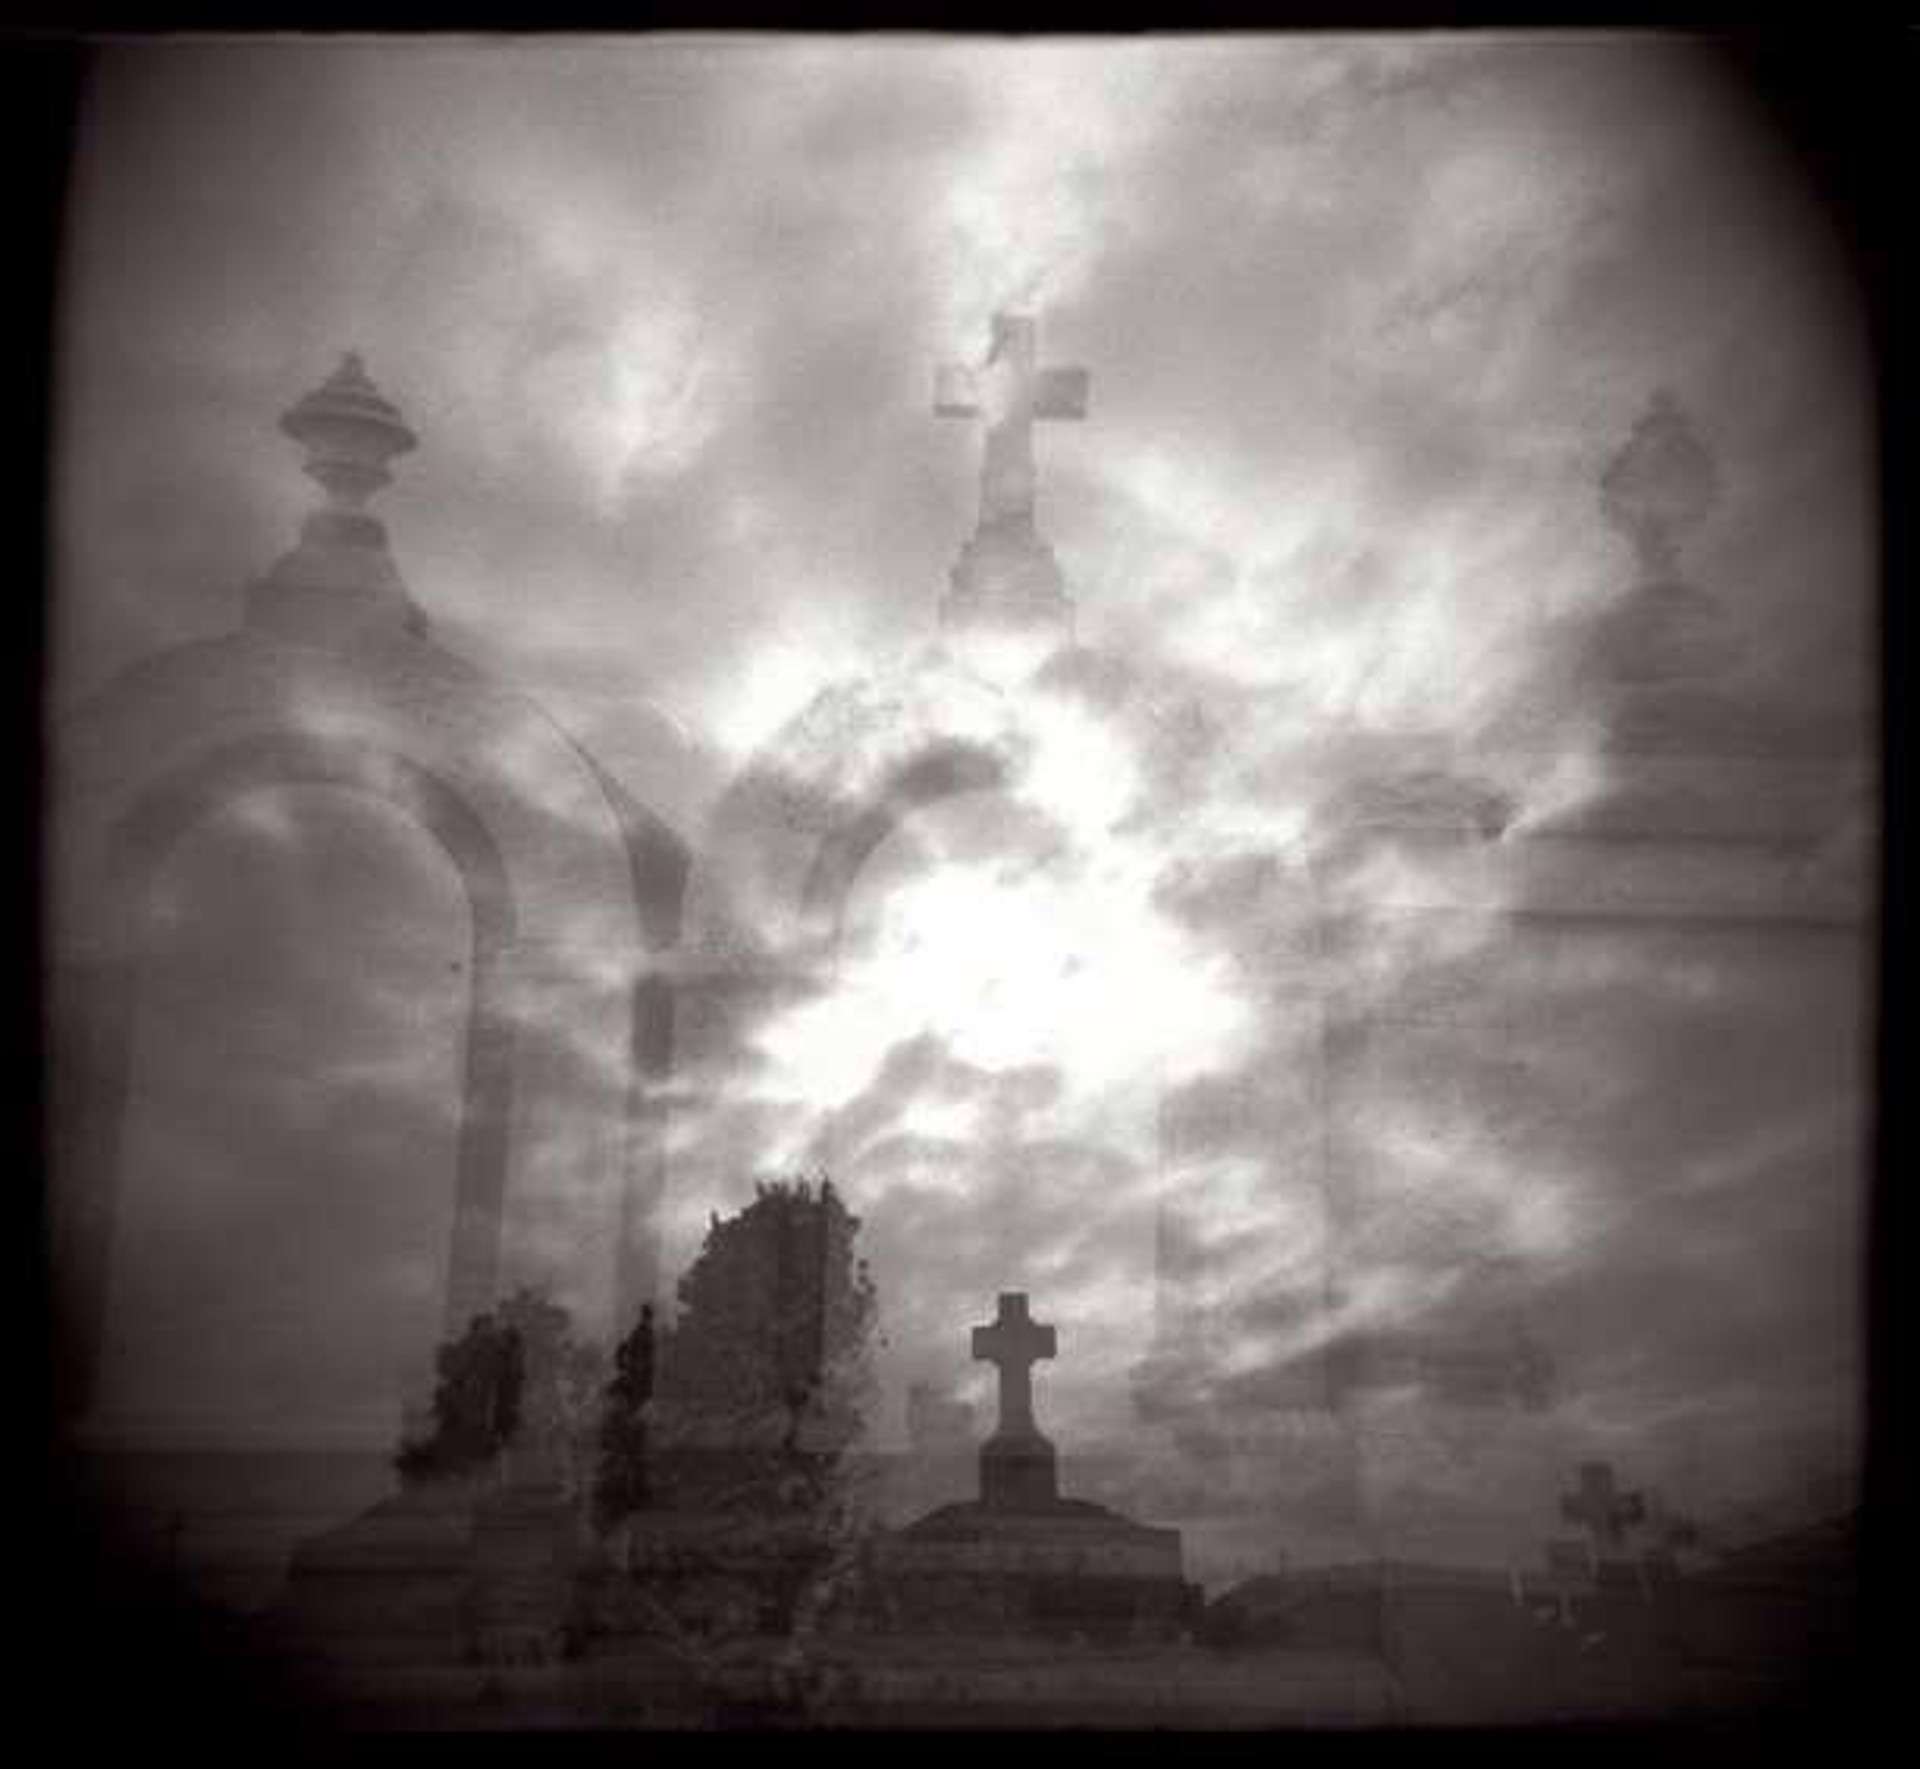 Tombs + Sky, St. Louis Cemetary, New Orleans, LA by Leslie Addison